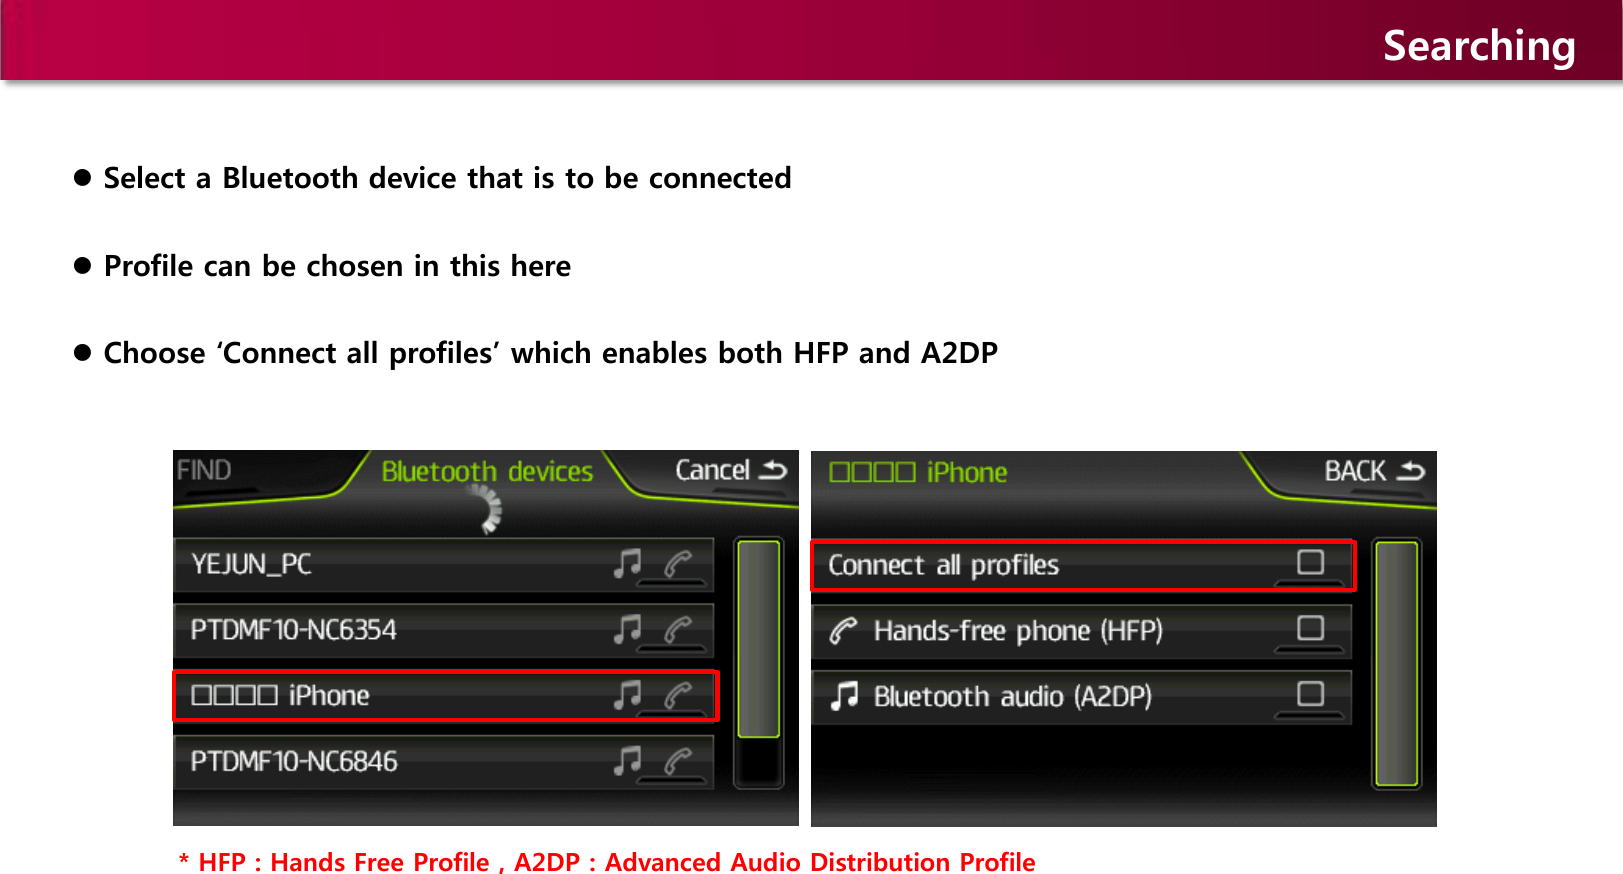  Select a Bluetooth device that is to be connected  Profile can be chosen in this here  Choose ‘Connect all profiles’ which enables both HFP and A2DP   * HFP : Hands Free Profile , A2DP : Advanced Audio Distribution Profile Searching 